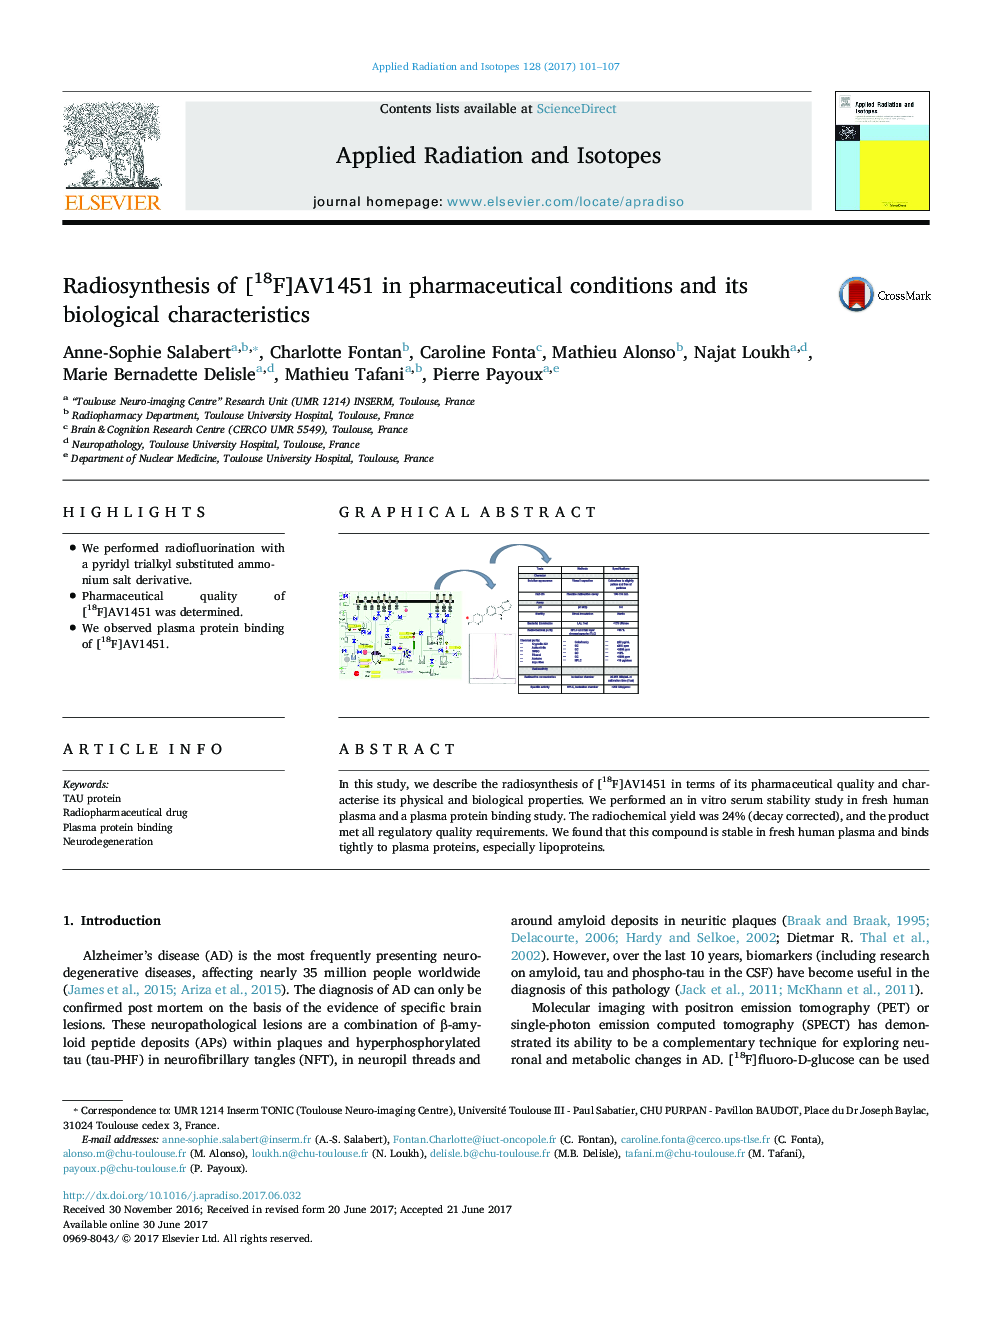 Radiosynthesis of [18F]AV1451 in pharmaceutical conditions and its biological characteristics